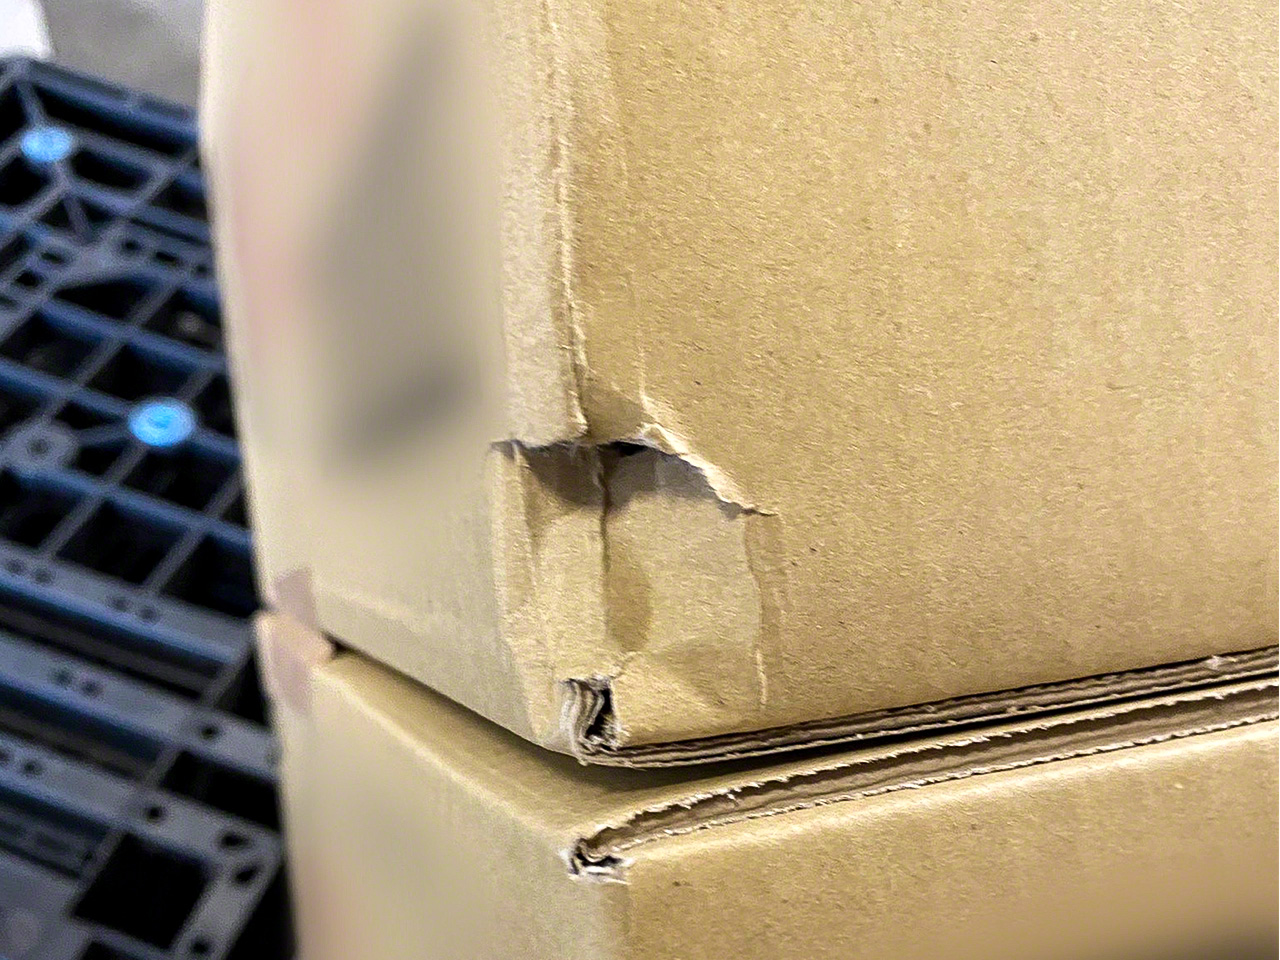 Damage to boxes often results in compensation claims, even if the contents are undamaged. (© Hashimoto Aiki)